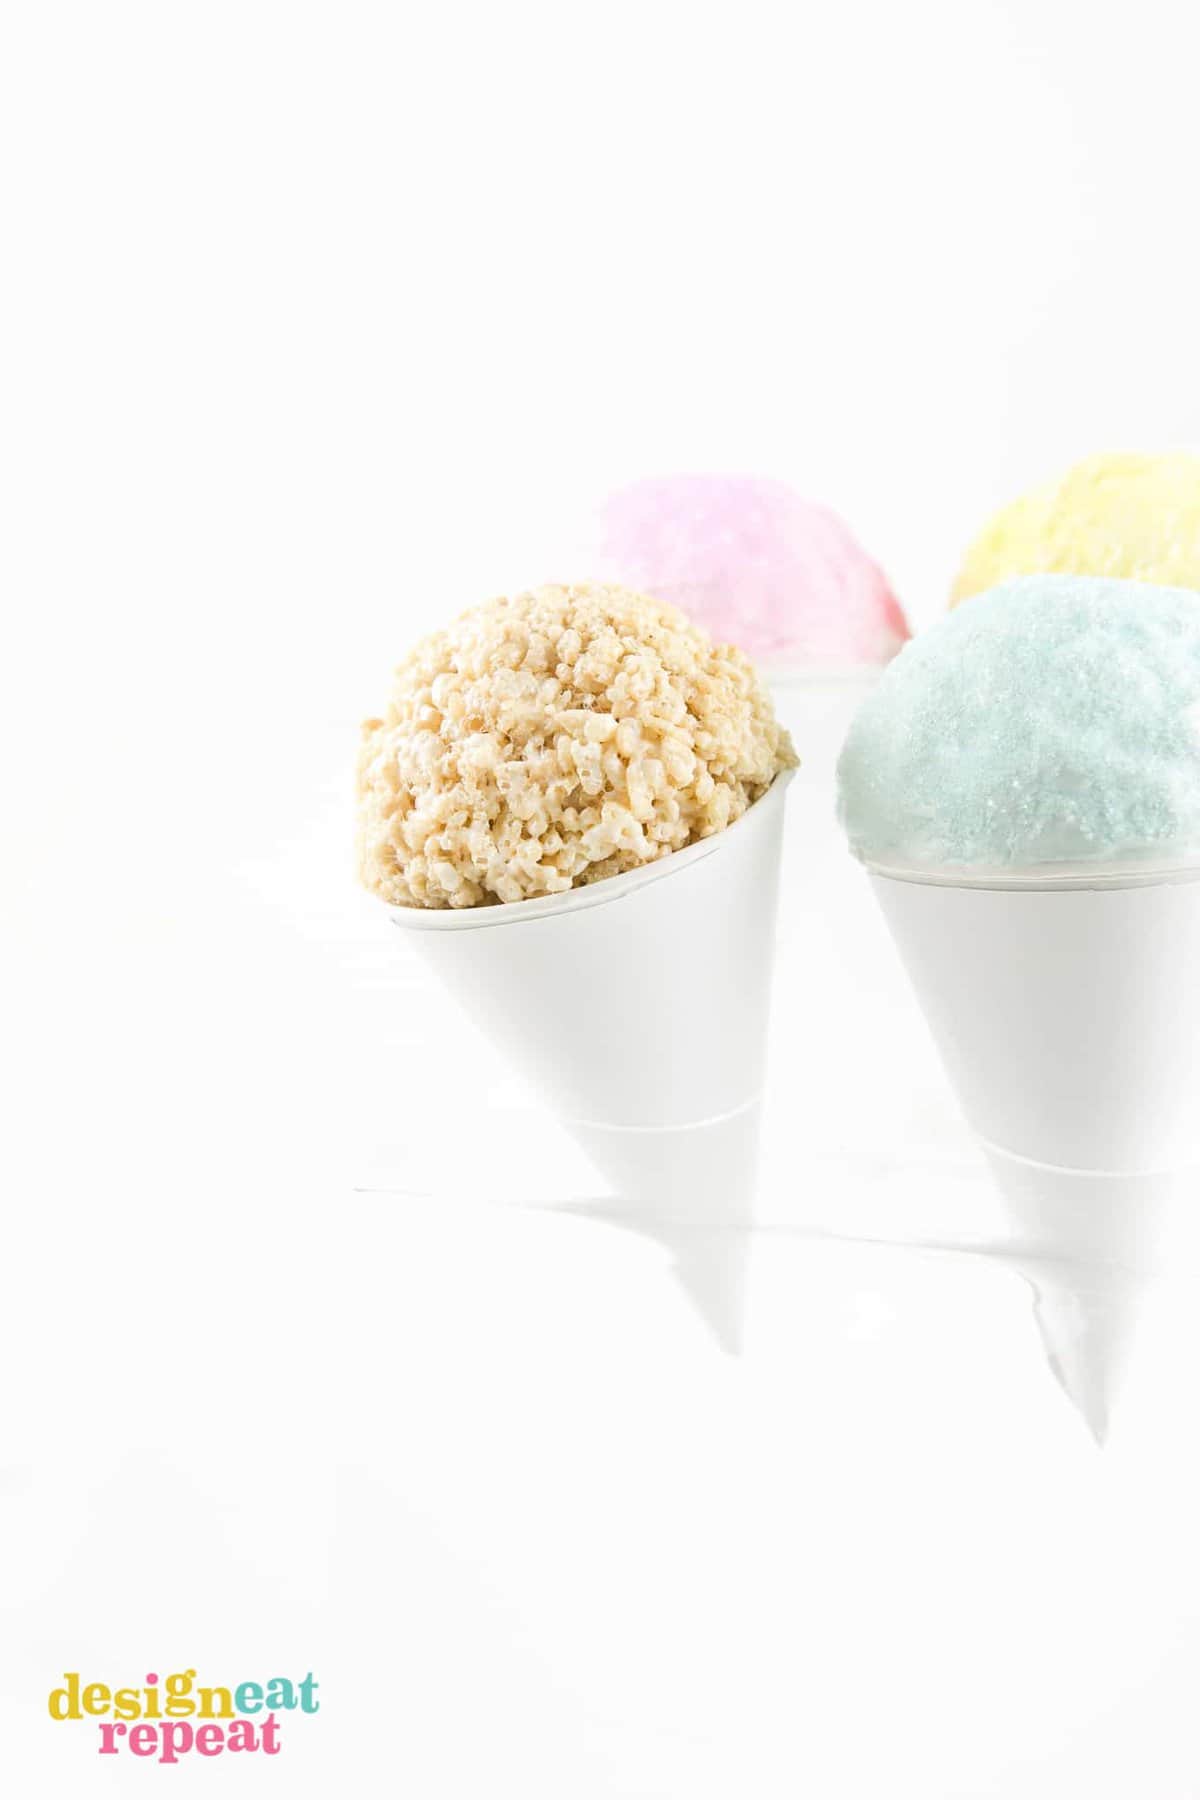 Ball of rice krispie cereal in paper snow cone with colored sugar.